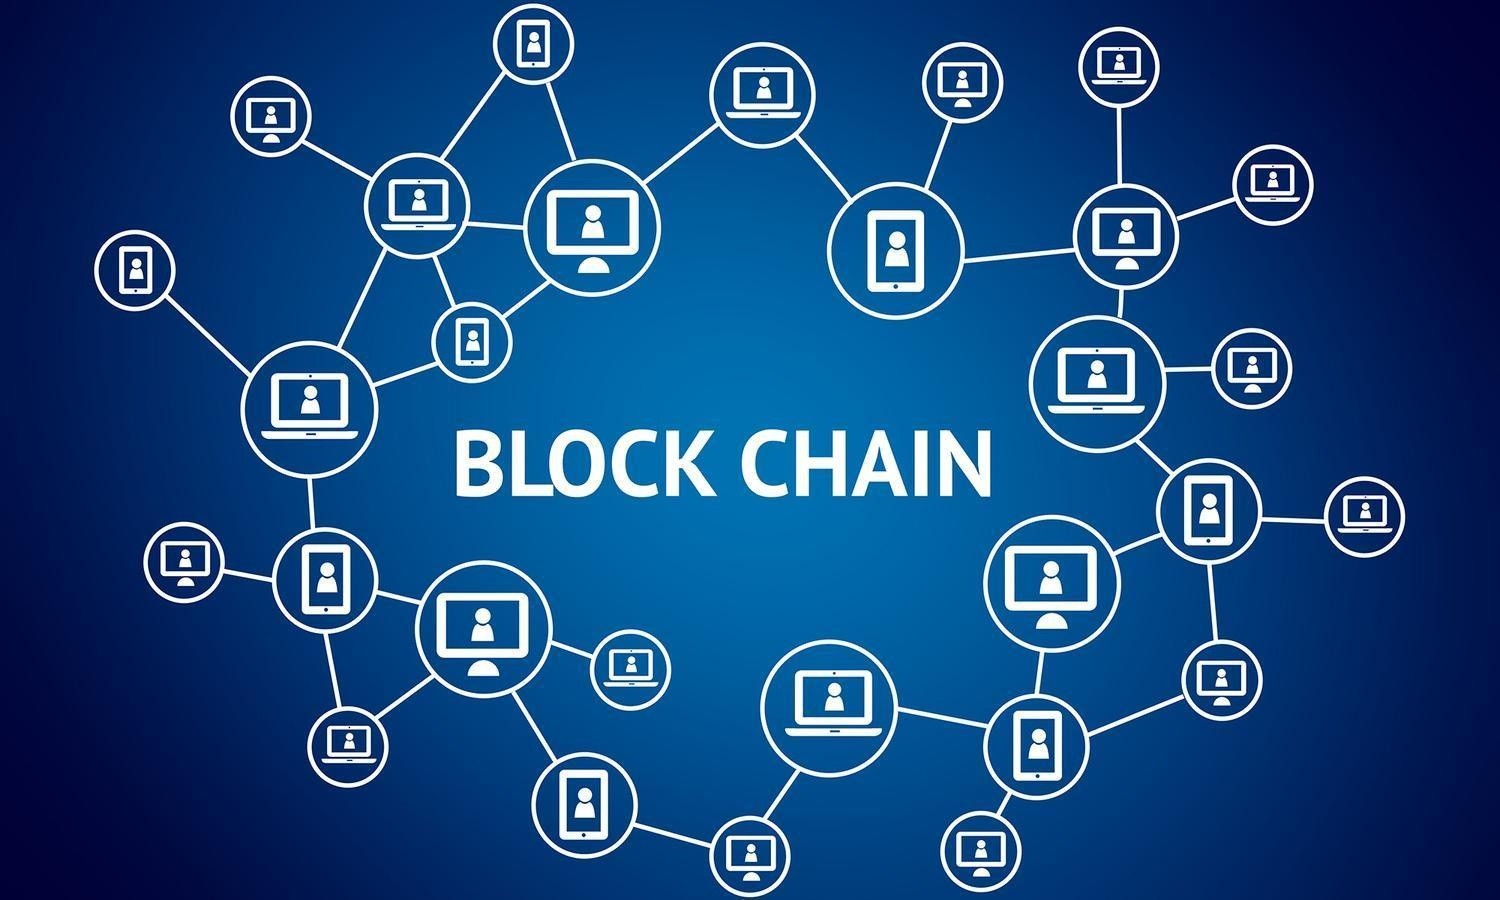 Basically, blockchain is a decentralized, peer-to-peer database platform that stores the blocks of transaction data linked to each other in chains, hence the name.